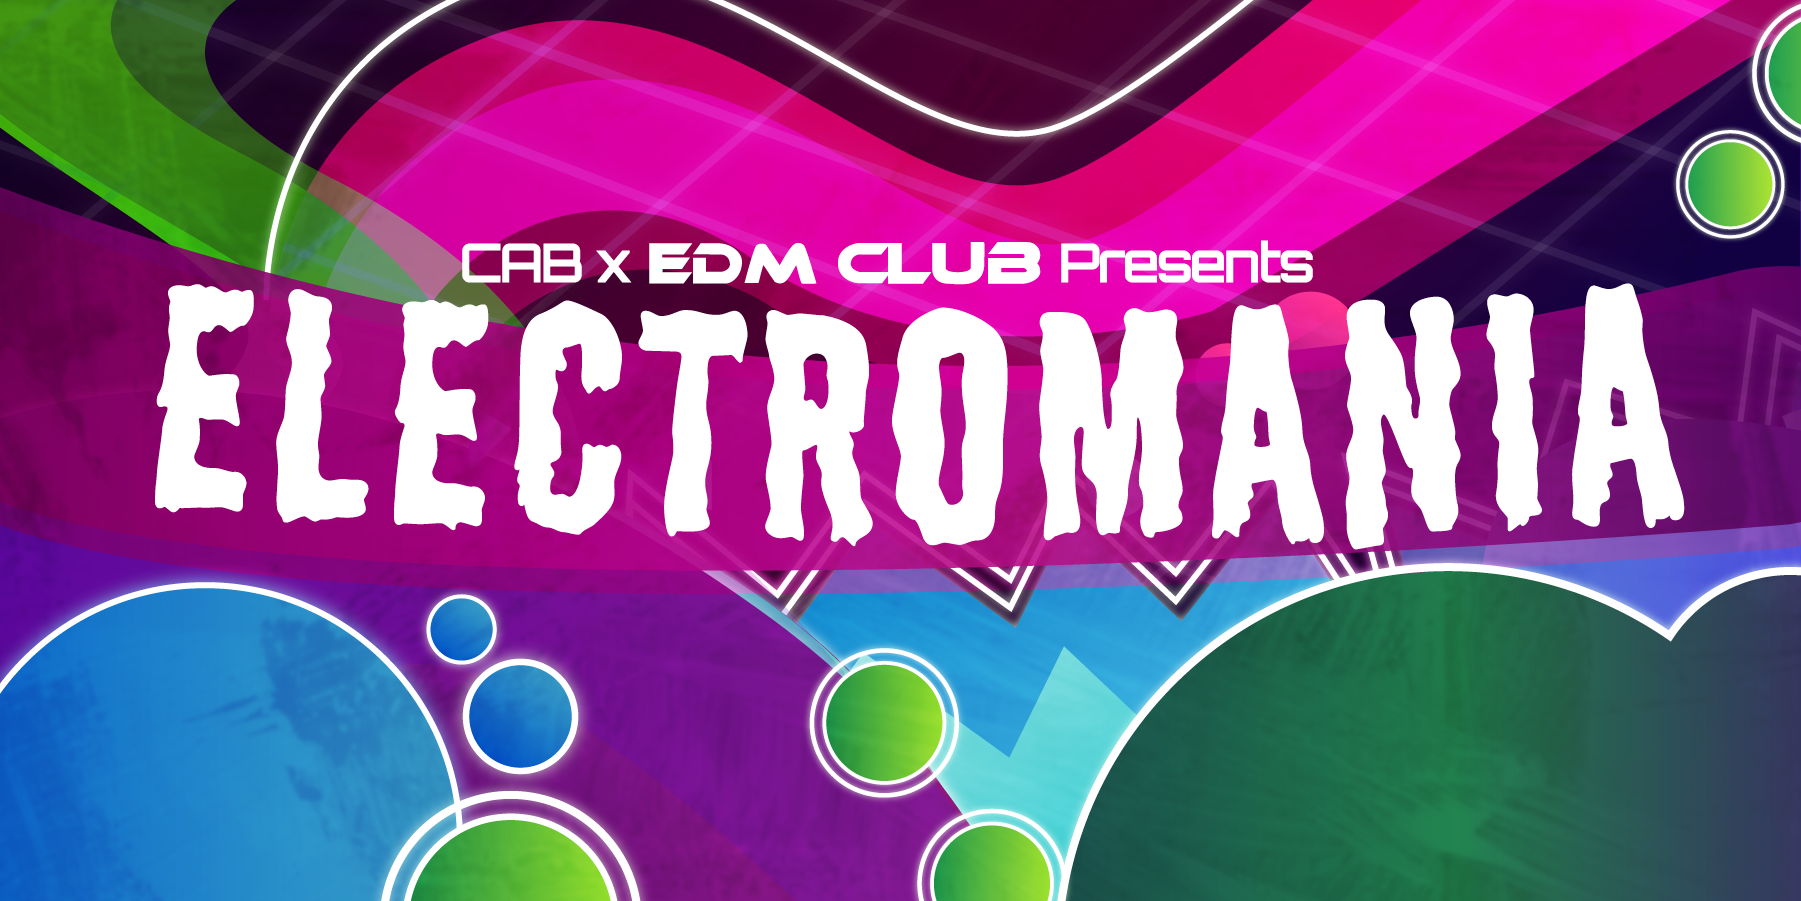 image with many colors and the text: CAB x EDM Club Presents: Electromania 